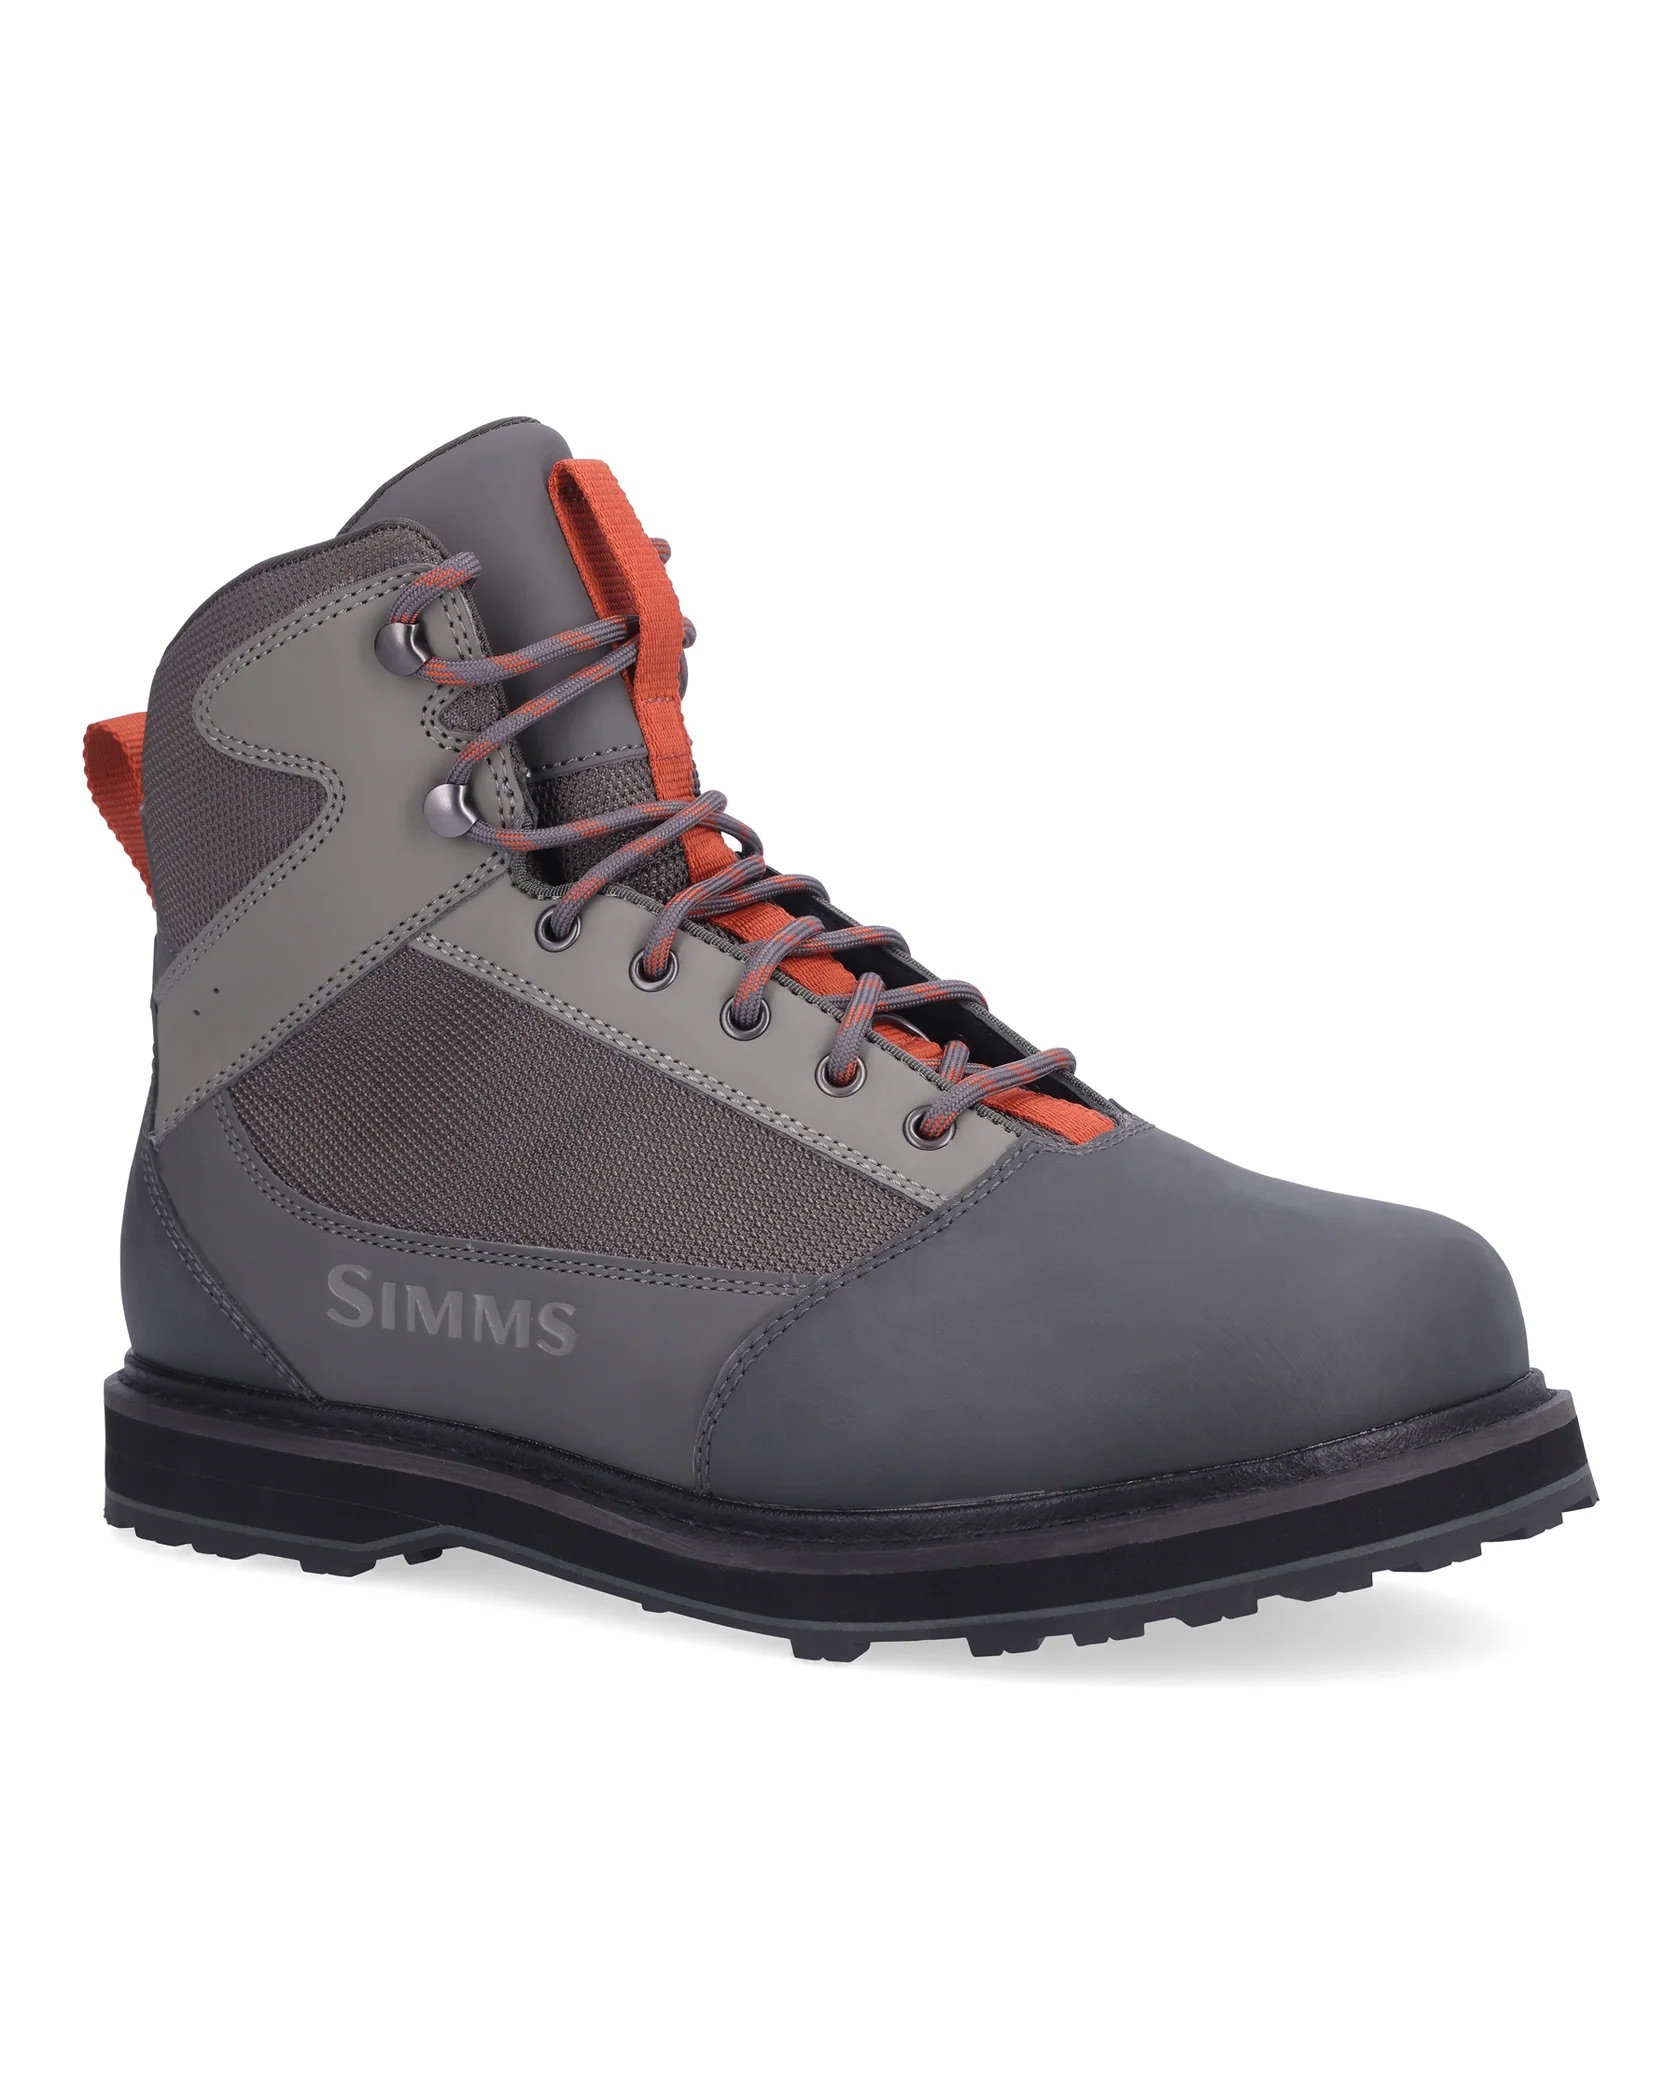 Simms Tributary Wading Boot - Rubber - Size 15